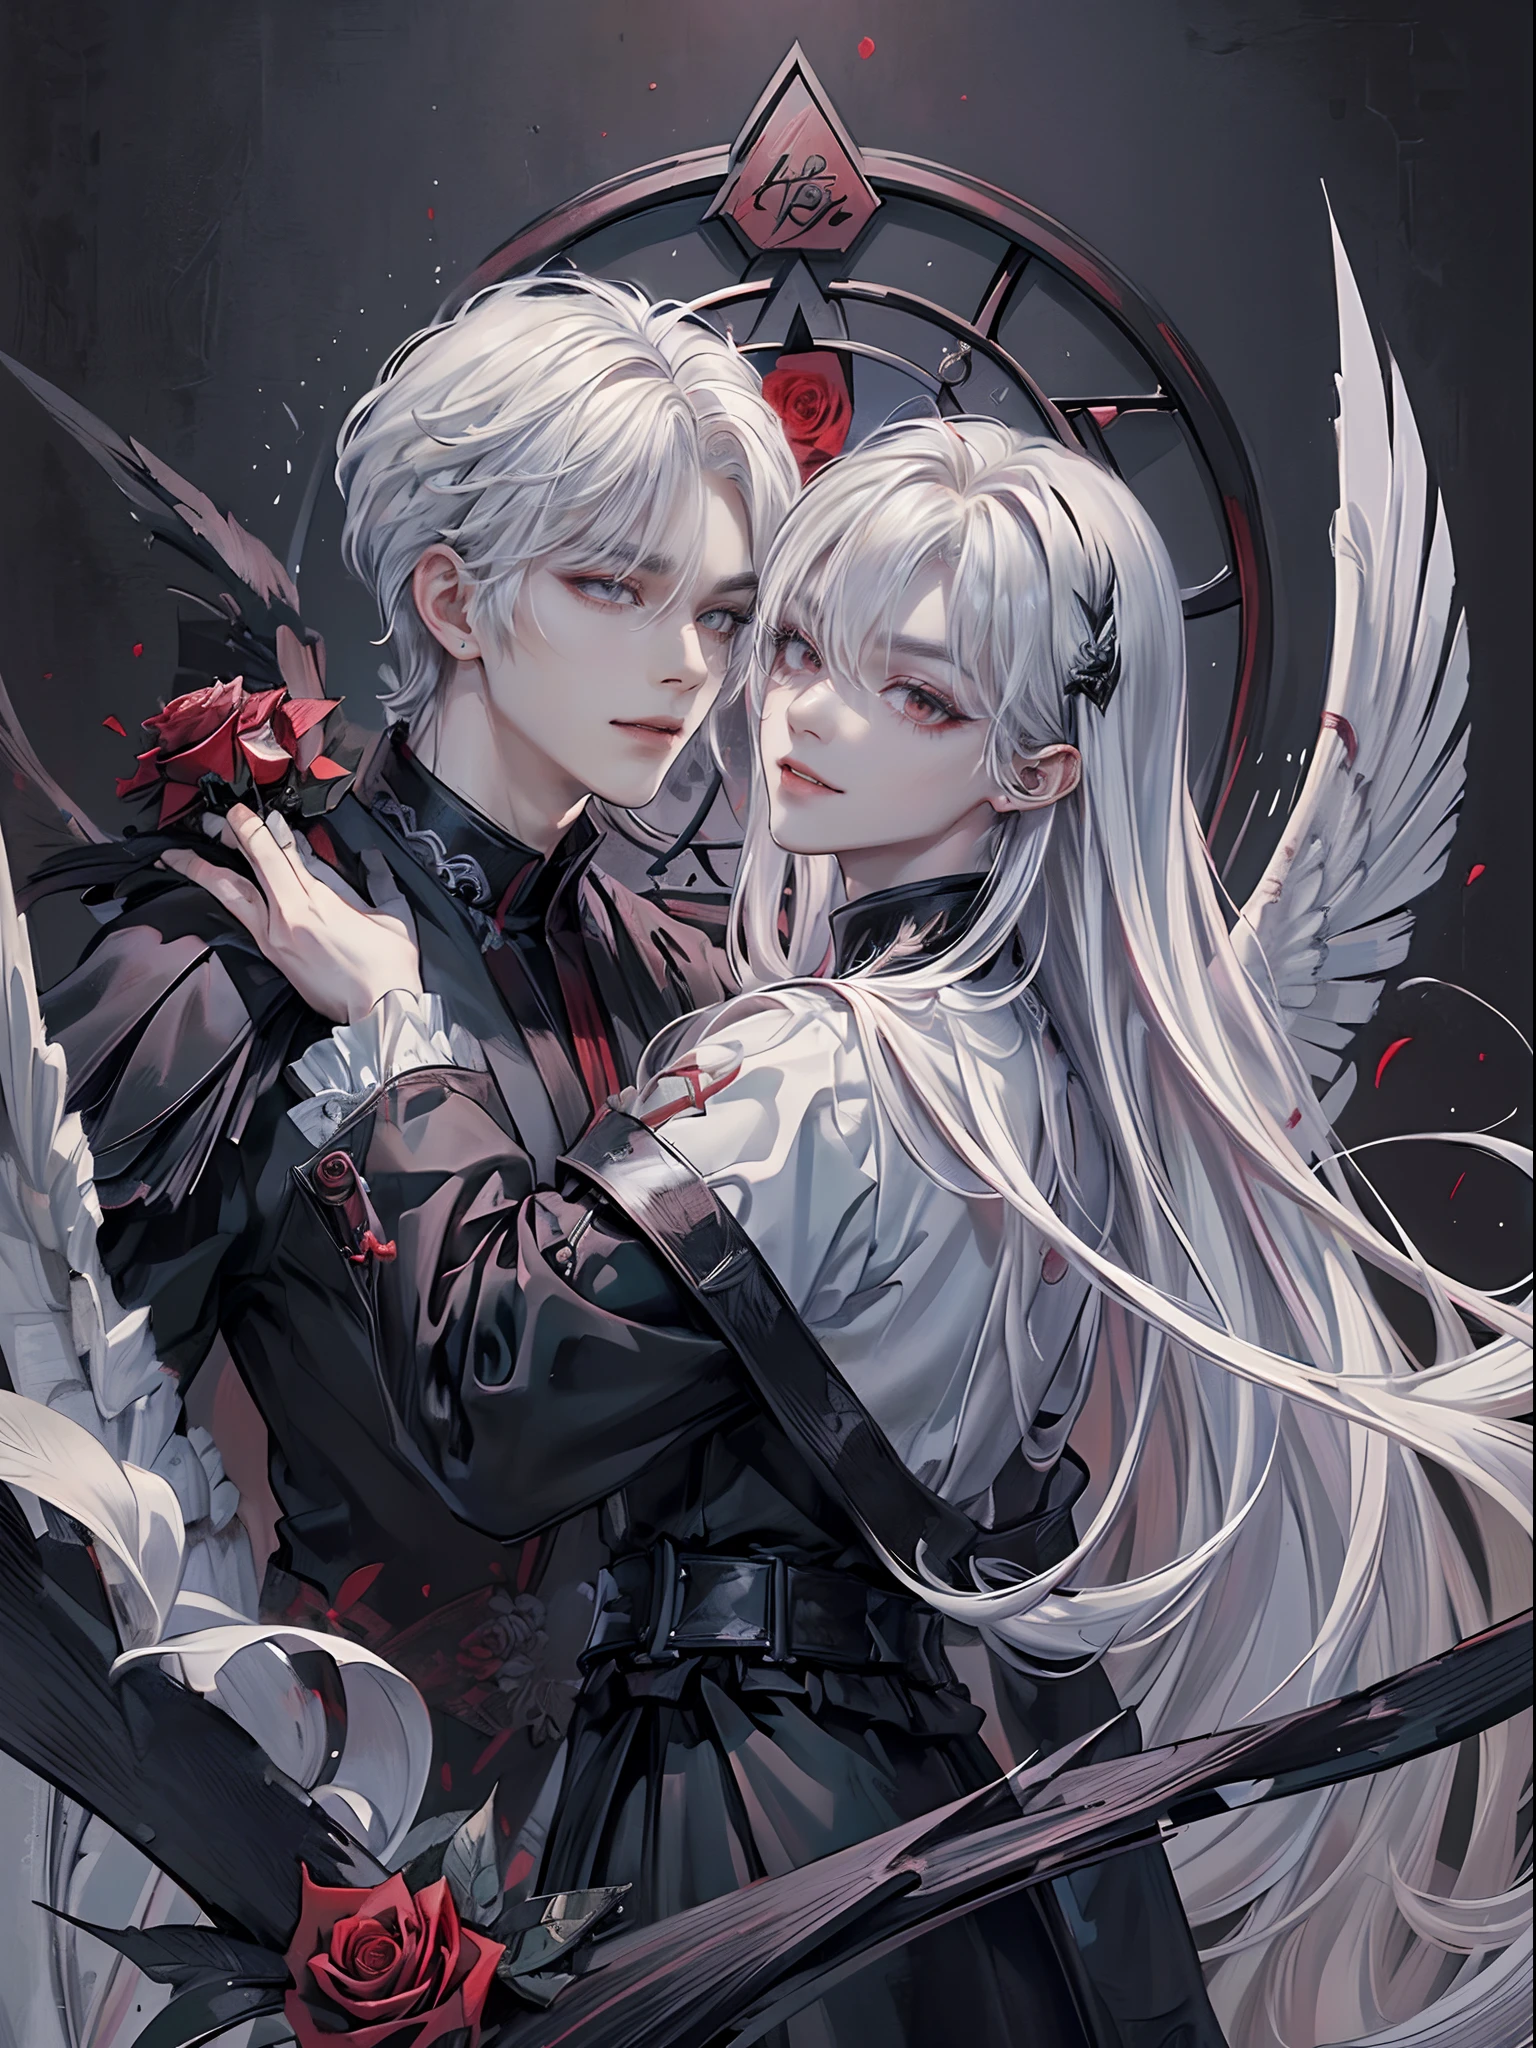 ((4K works))、​masterpiece、（top-quality)、((high-level image quality))、((One Beautiful Fallen Angel Man))、Slim body、((Vampire Black Y-Shirt Fashion))、(Detailed beautiful eyes)、((Red roses and crows on fantastic black background))、Inside the Evil Castle、((Face similar to Chaewon in Ruseraphim))、((Center parting long-haired and gray-haired man))、(((white  hair)))、((Smaller face))、((Neutral face))、((Red Eyes))、((Korean Male))、((18year old))、((wild boy))、((Show your teeth and smile))、((Korean makeup with black eyeshadow))、((elongated and sharp eyes))、(((Shot alone)))、((Fallen Angel))、Photos of fallen angels、Villain、Dark Proof、((Shot diagonally from the side))、King of Fallen Angels